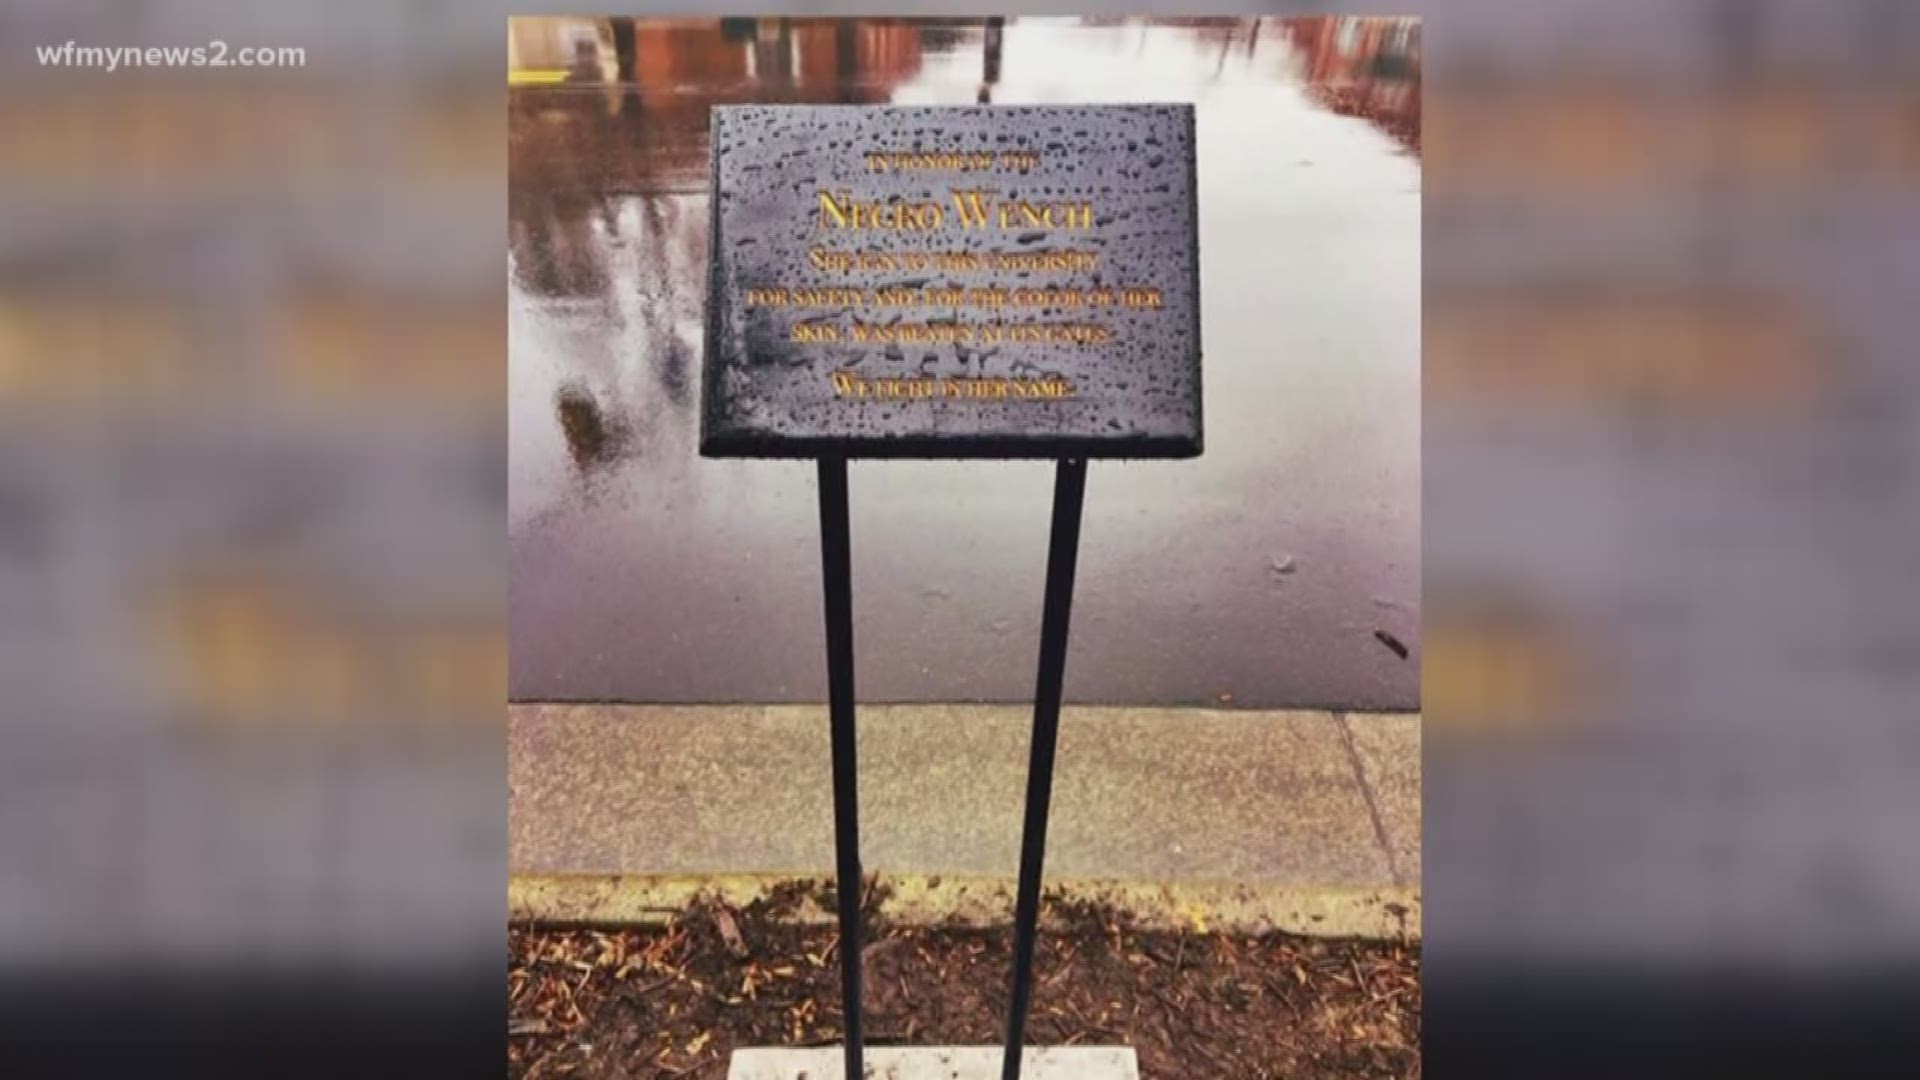 After a plaque was put up to honor black history, the group has announced that they have stolen the plaque and will continue to do so until Silent Sam is put back.